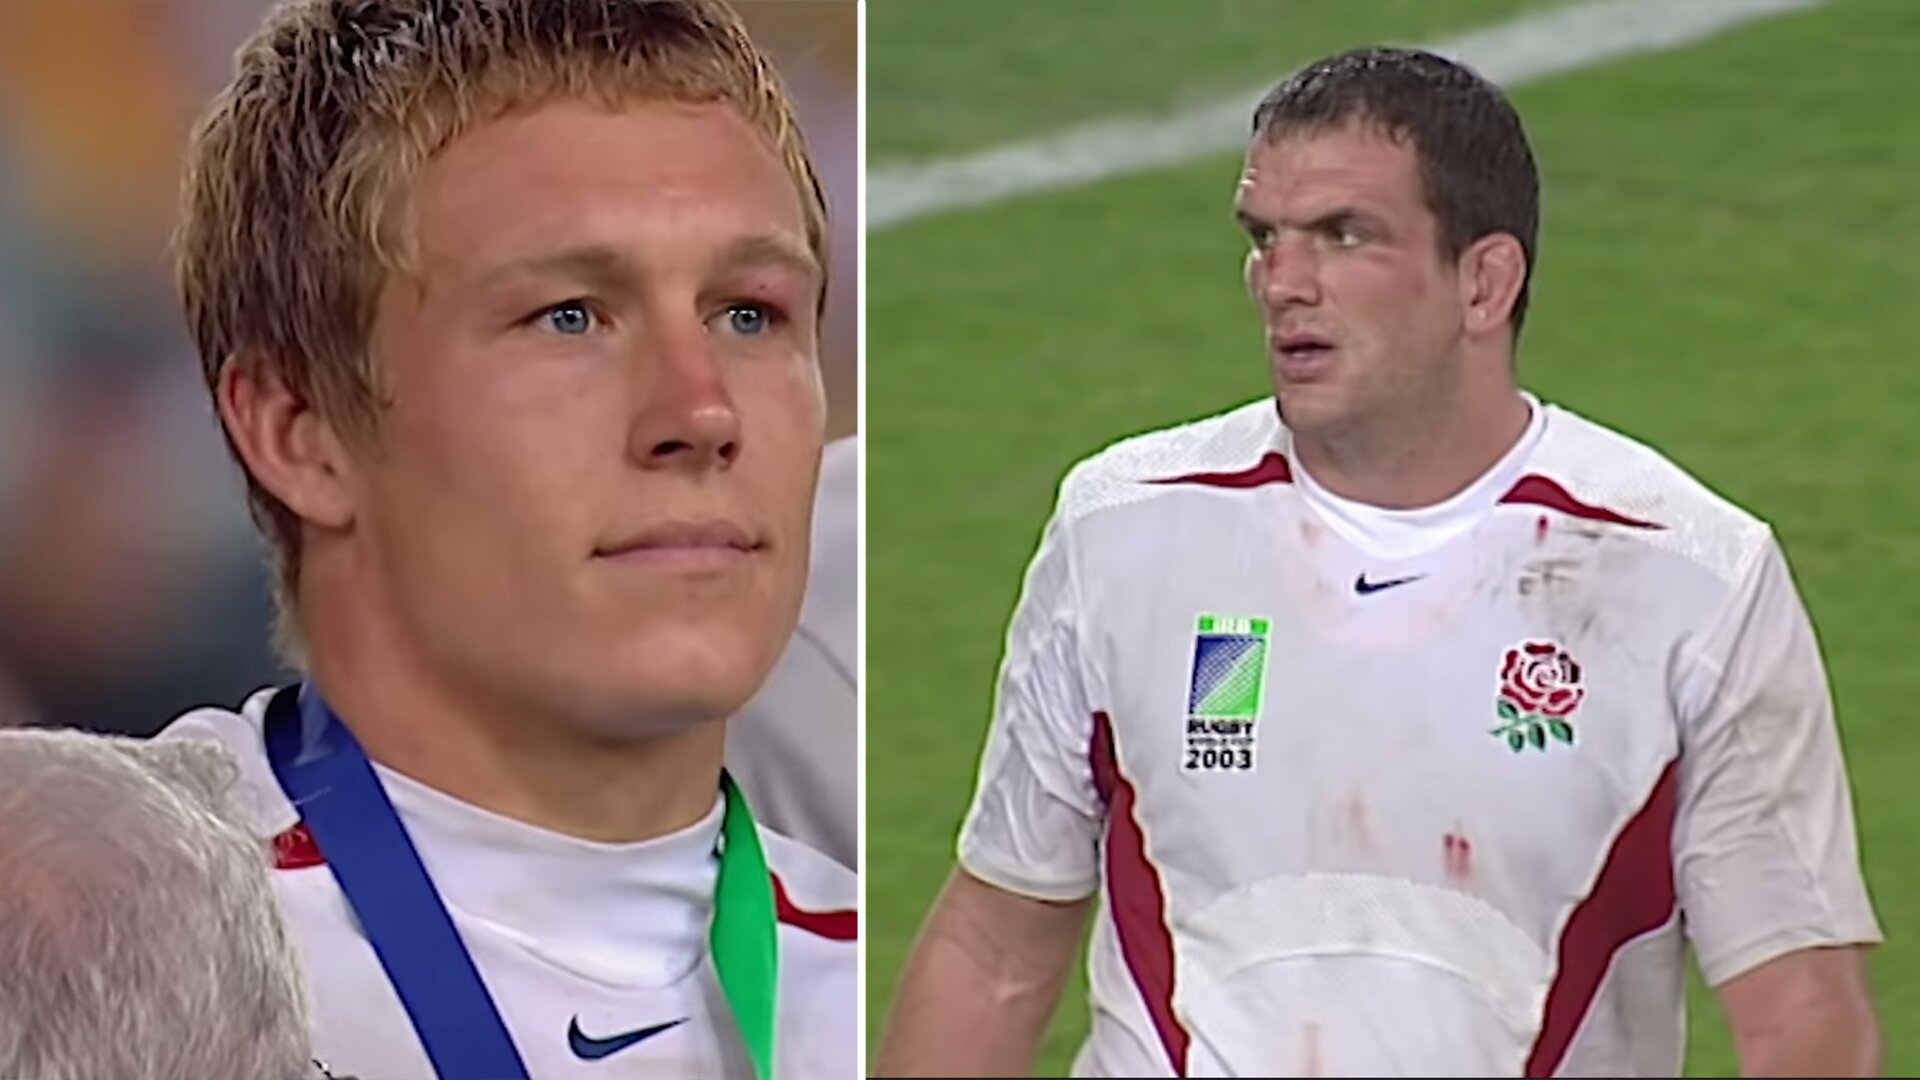 The World Cup final in 2003 is being shown live right now